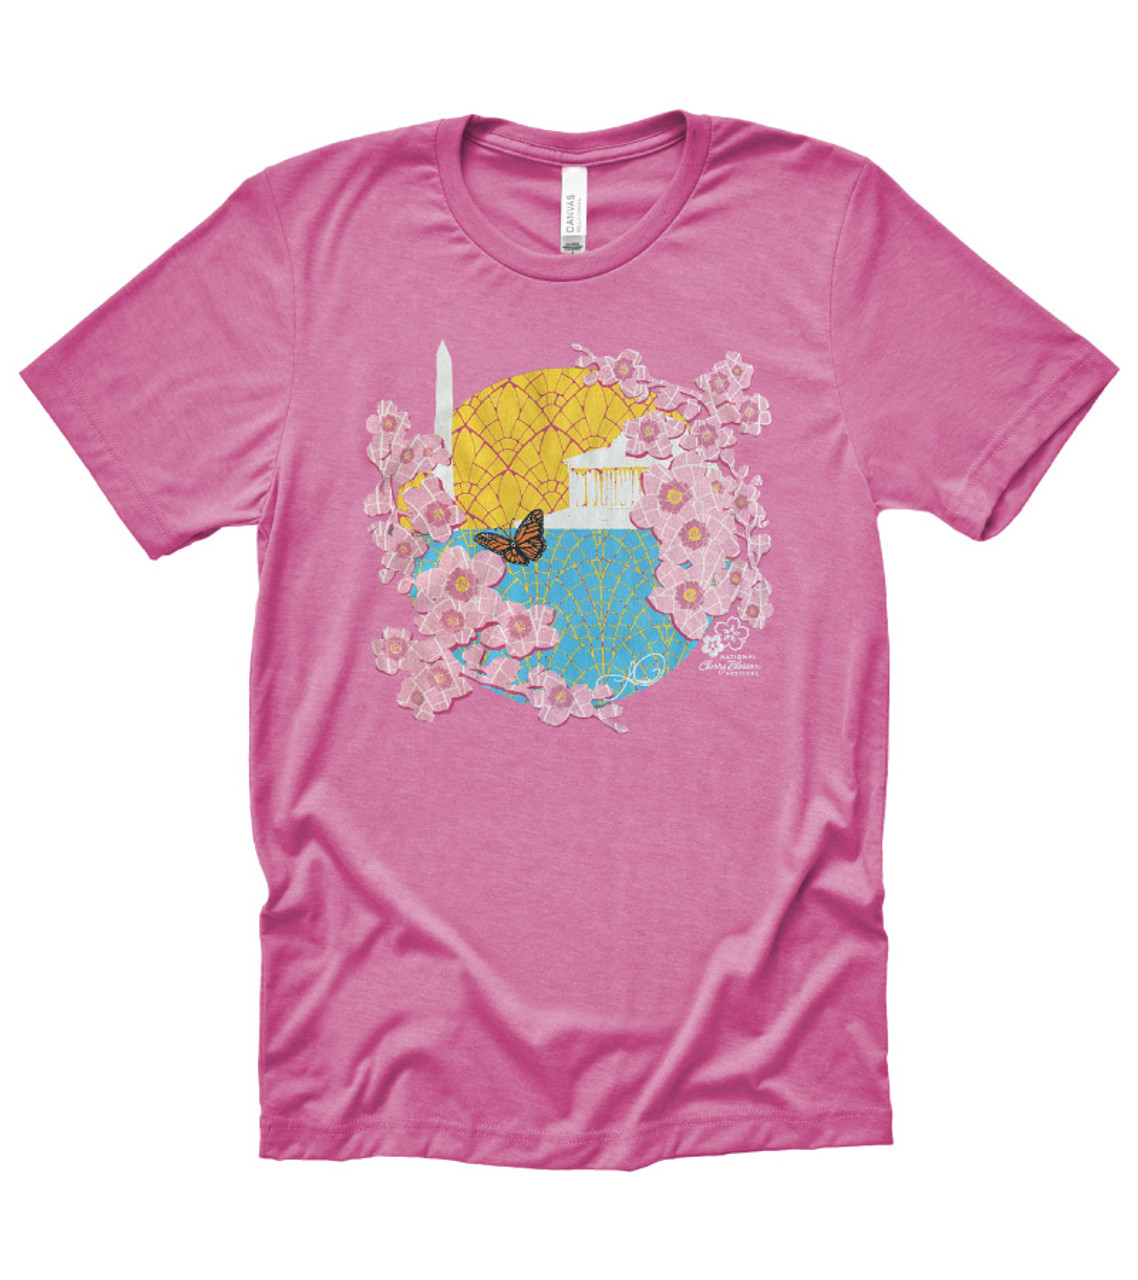 Cherry Blossom T-Shirt – National Archives Store